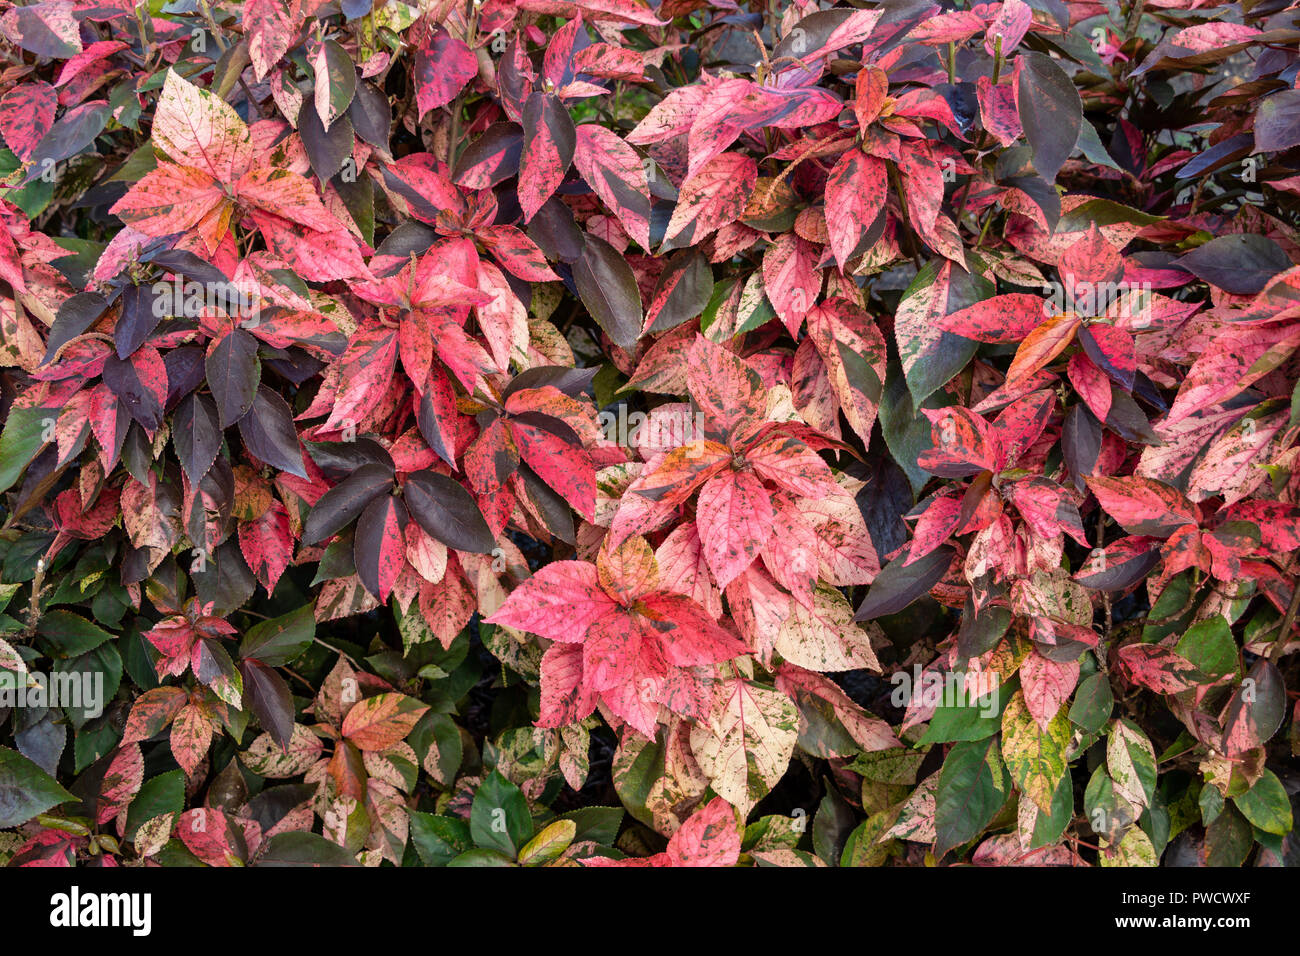 Copperleaf plant (Acalypha amentacea wilkesiana), red and green leaves - Pembroke Pines, Florida, USA Stock Photo